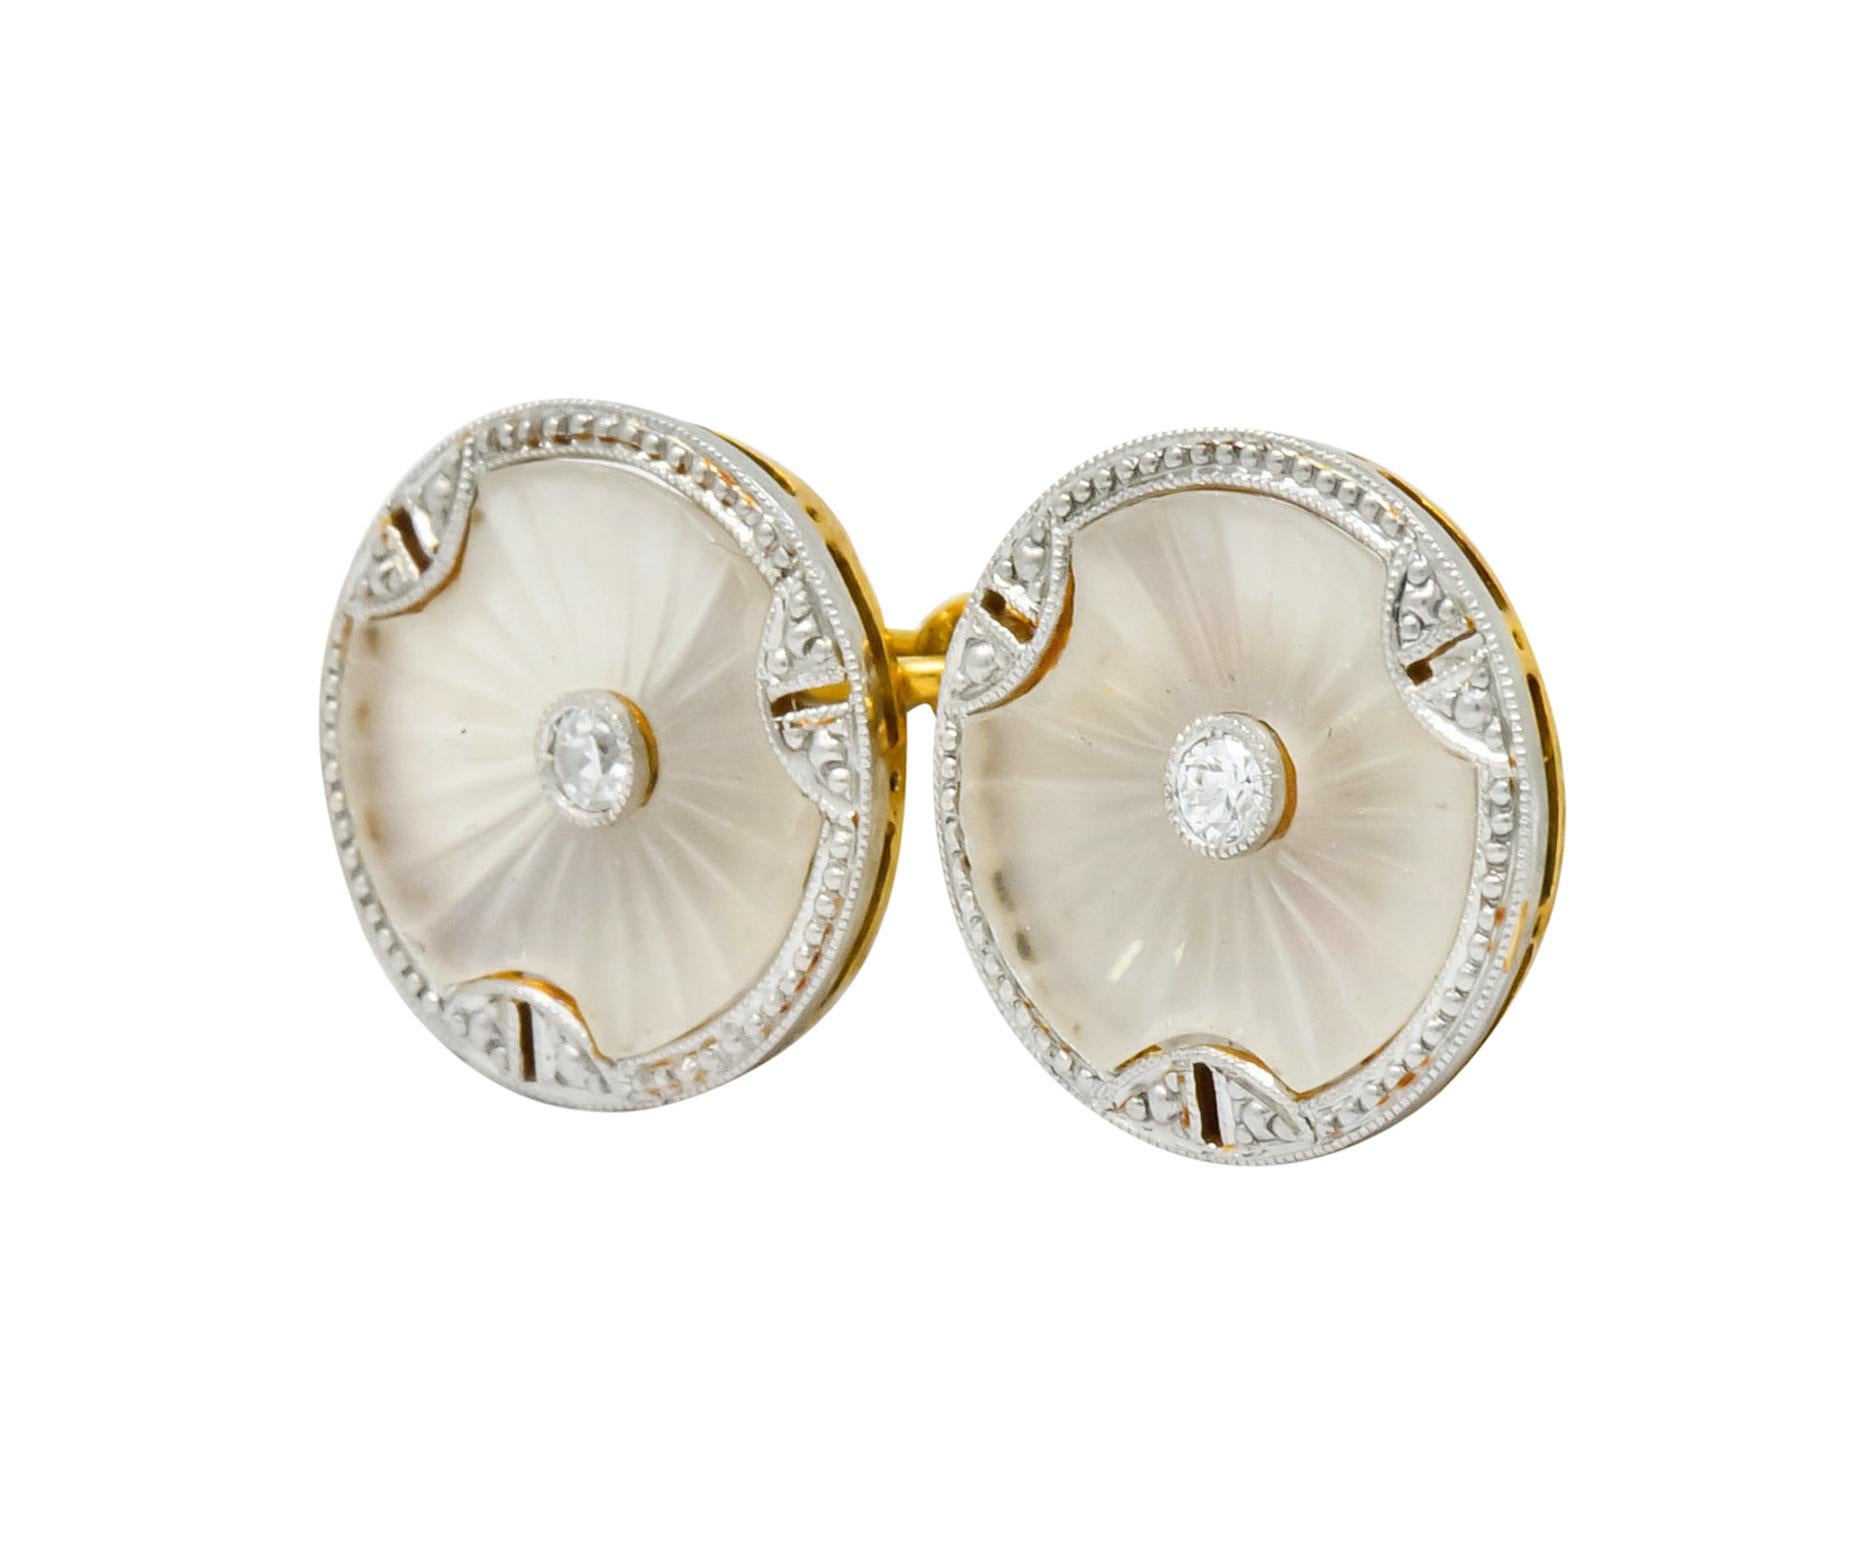 Link style cufflinks terminating as two round, platinum-topped, millegrain frames bezel set with camphor glass

Camphor glass is deeply engraved with a radiating burst motif and centers transitional cut diamonds weighing in total 0.12 carat,